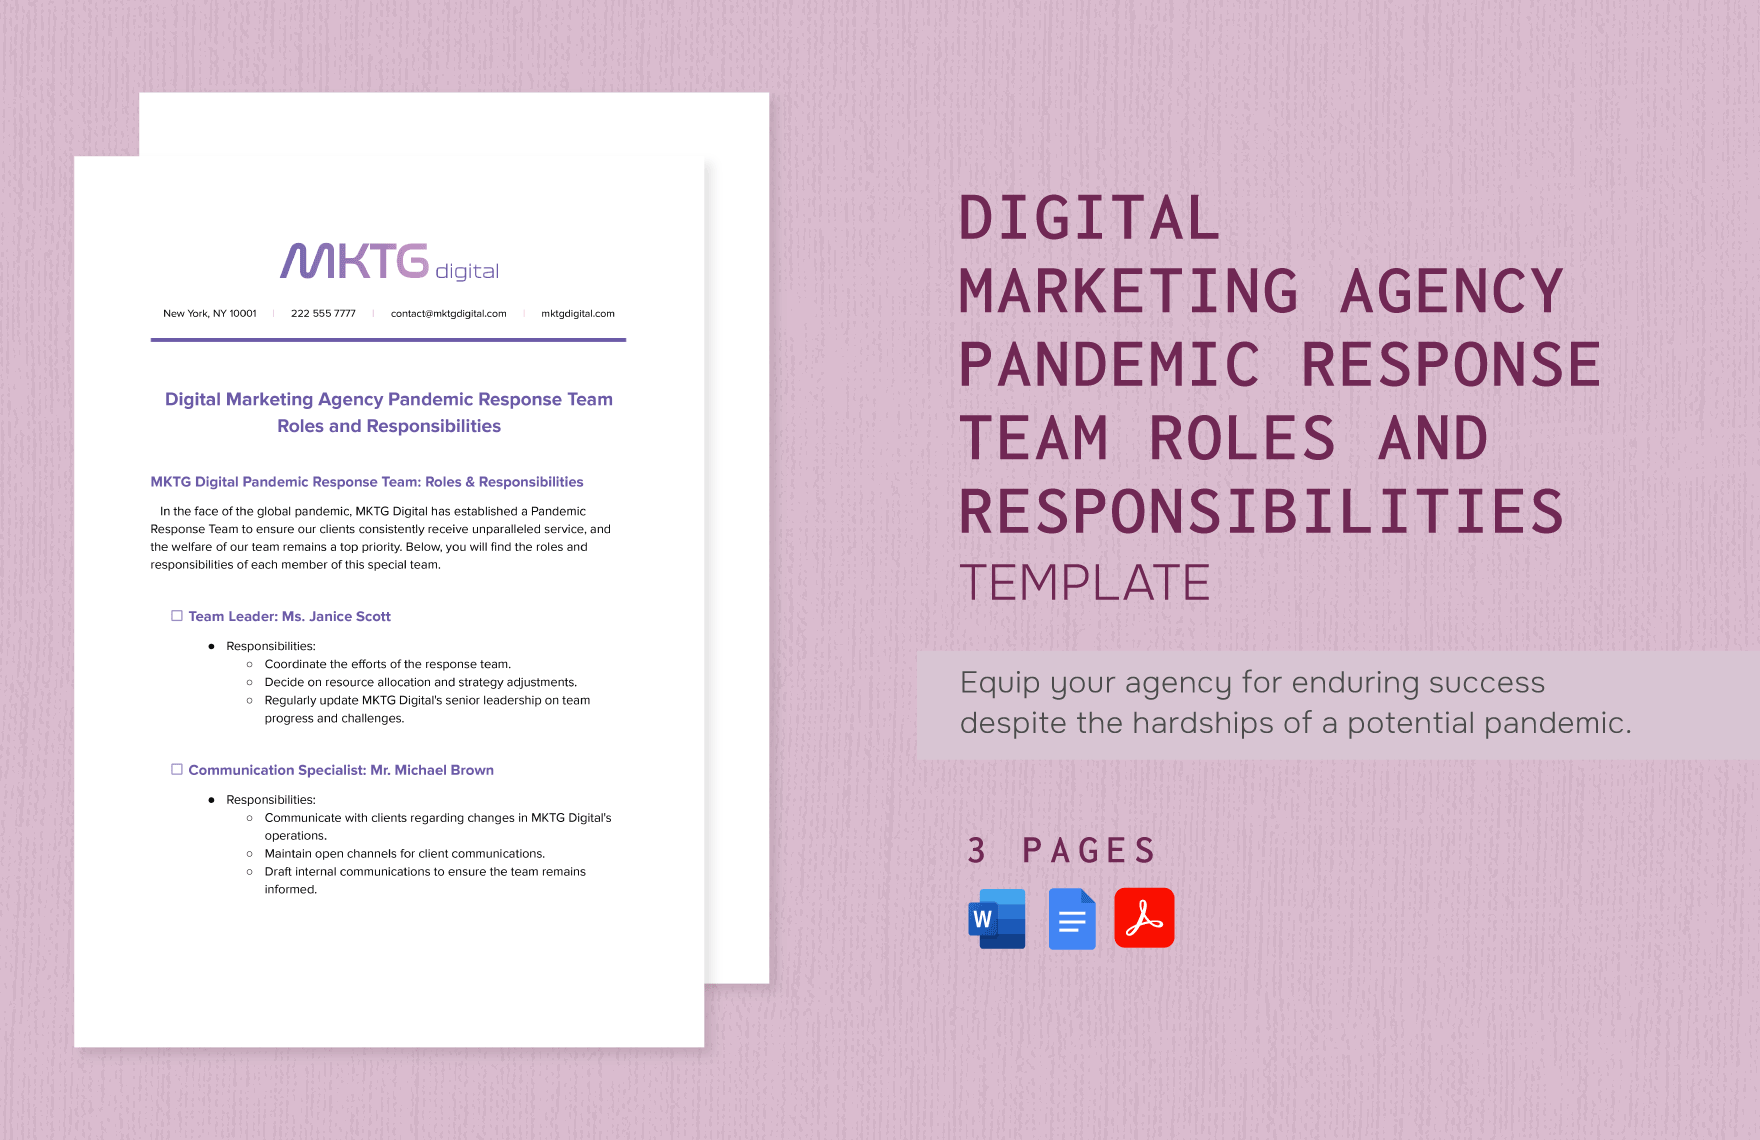 Digital Marketing Agency Pandemic Response Team Roles and Responsibilities Template